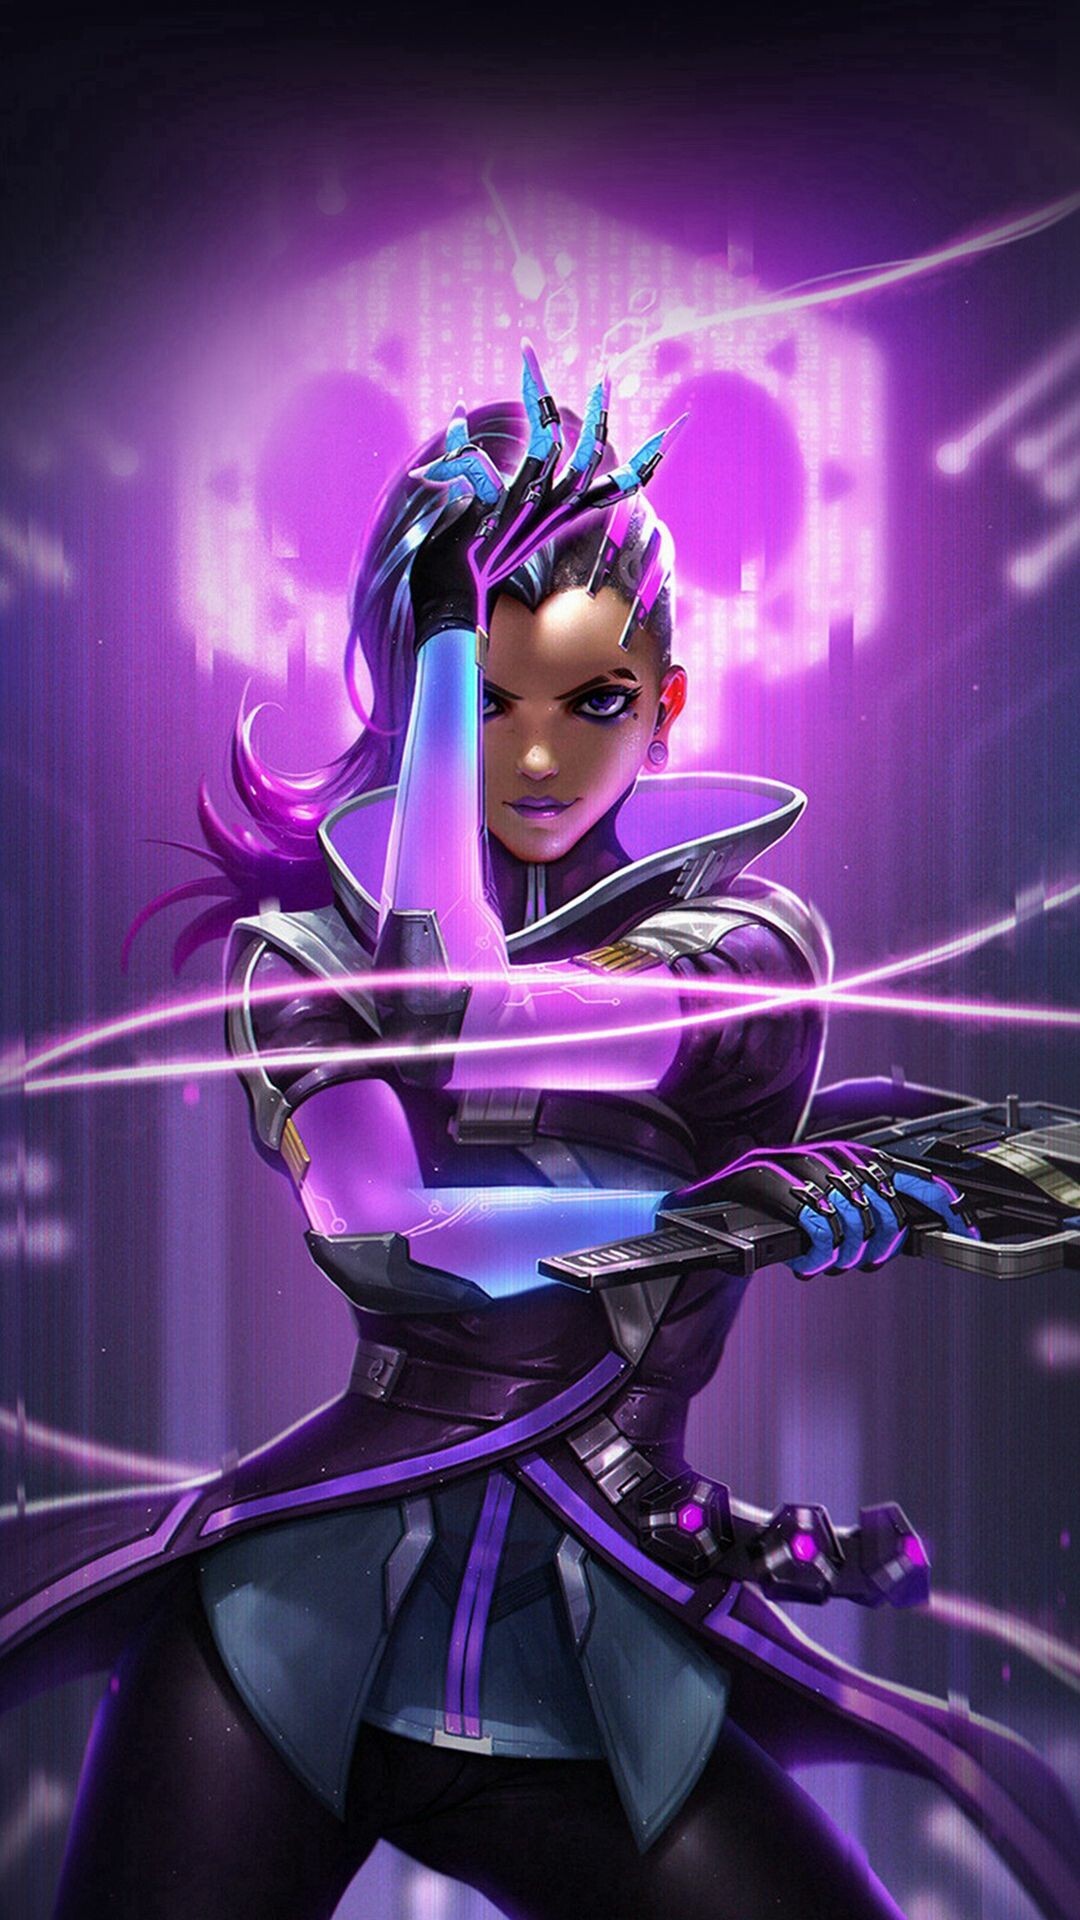 Overwatch: Sombra, Olivia Coloma, A powerful infiltrator. 1080x1920 Full HD Wallpaper.